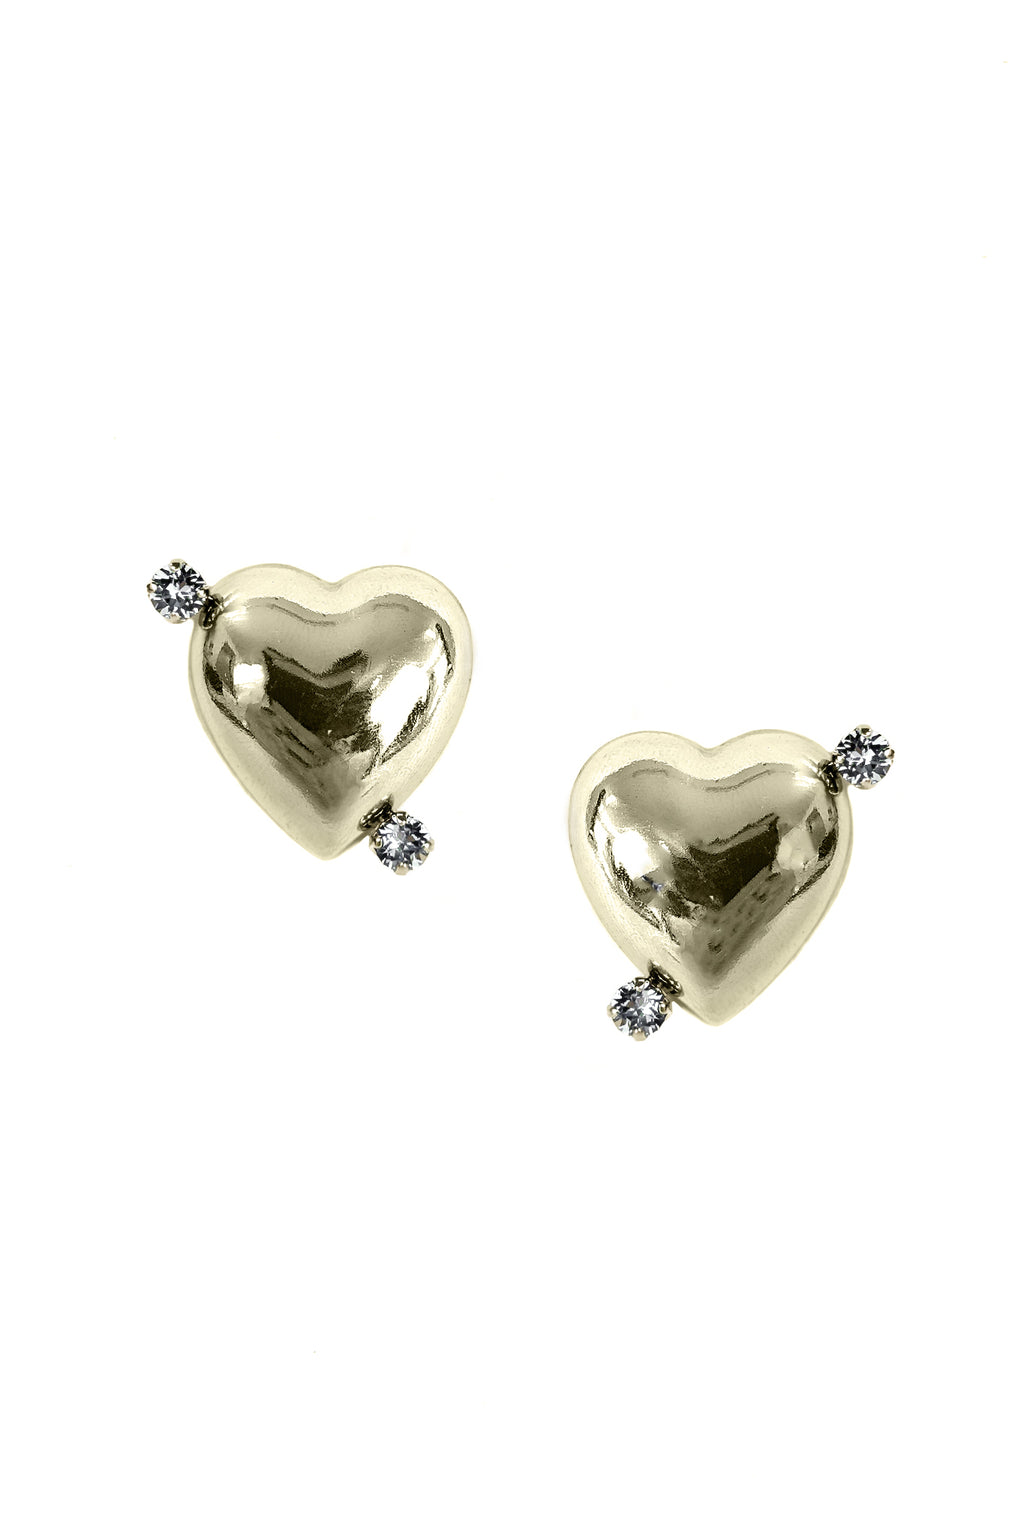 Justine Clenquet Juno Earrings, Gold